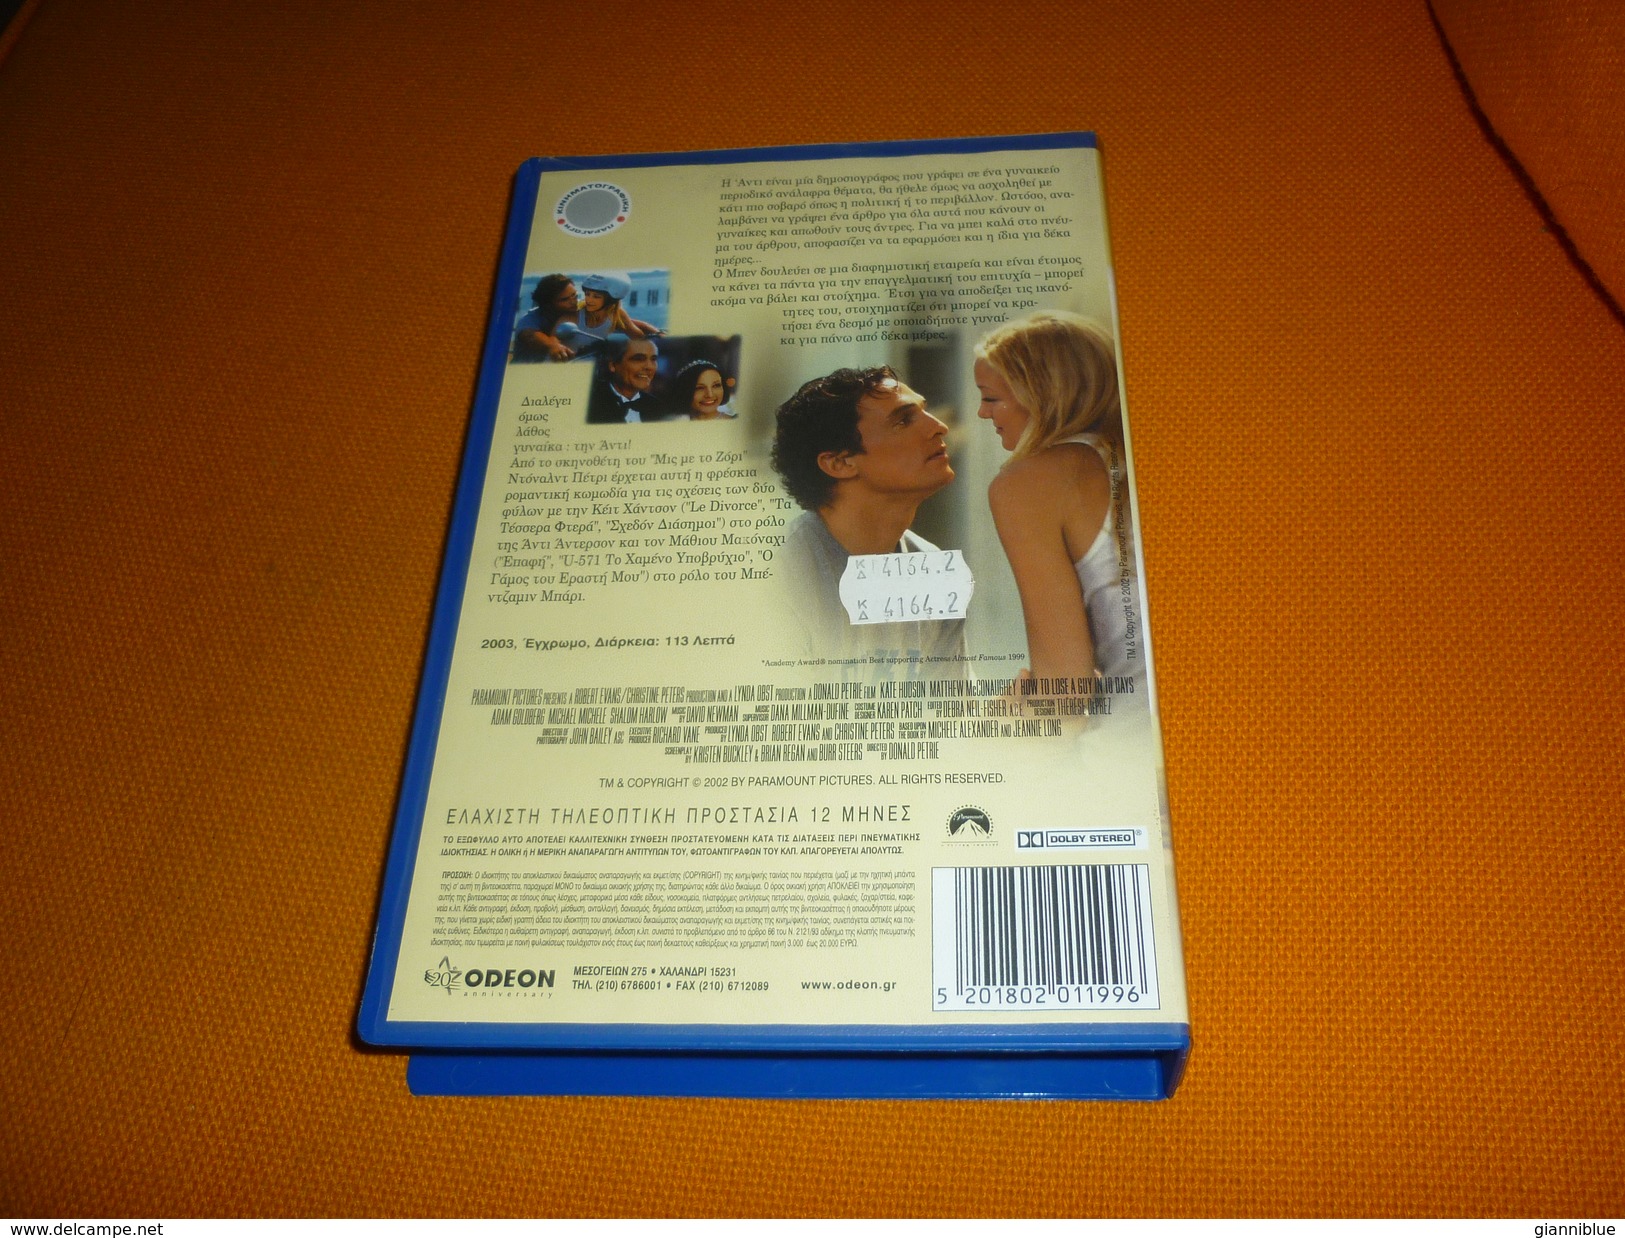 How To Lose A Guy In 10 Days Old Greek Vhs Cassette Tape From Greece - Romantici